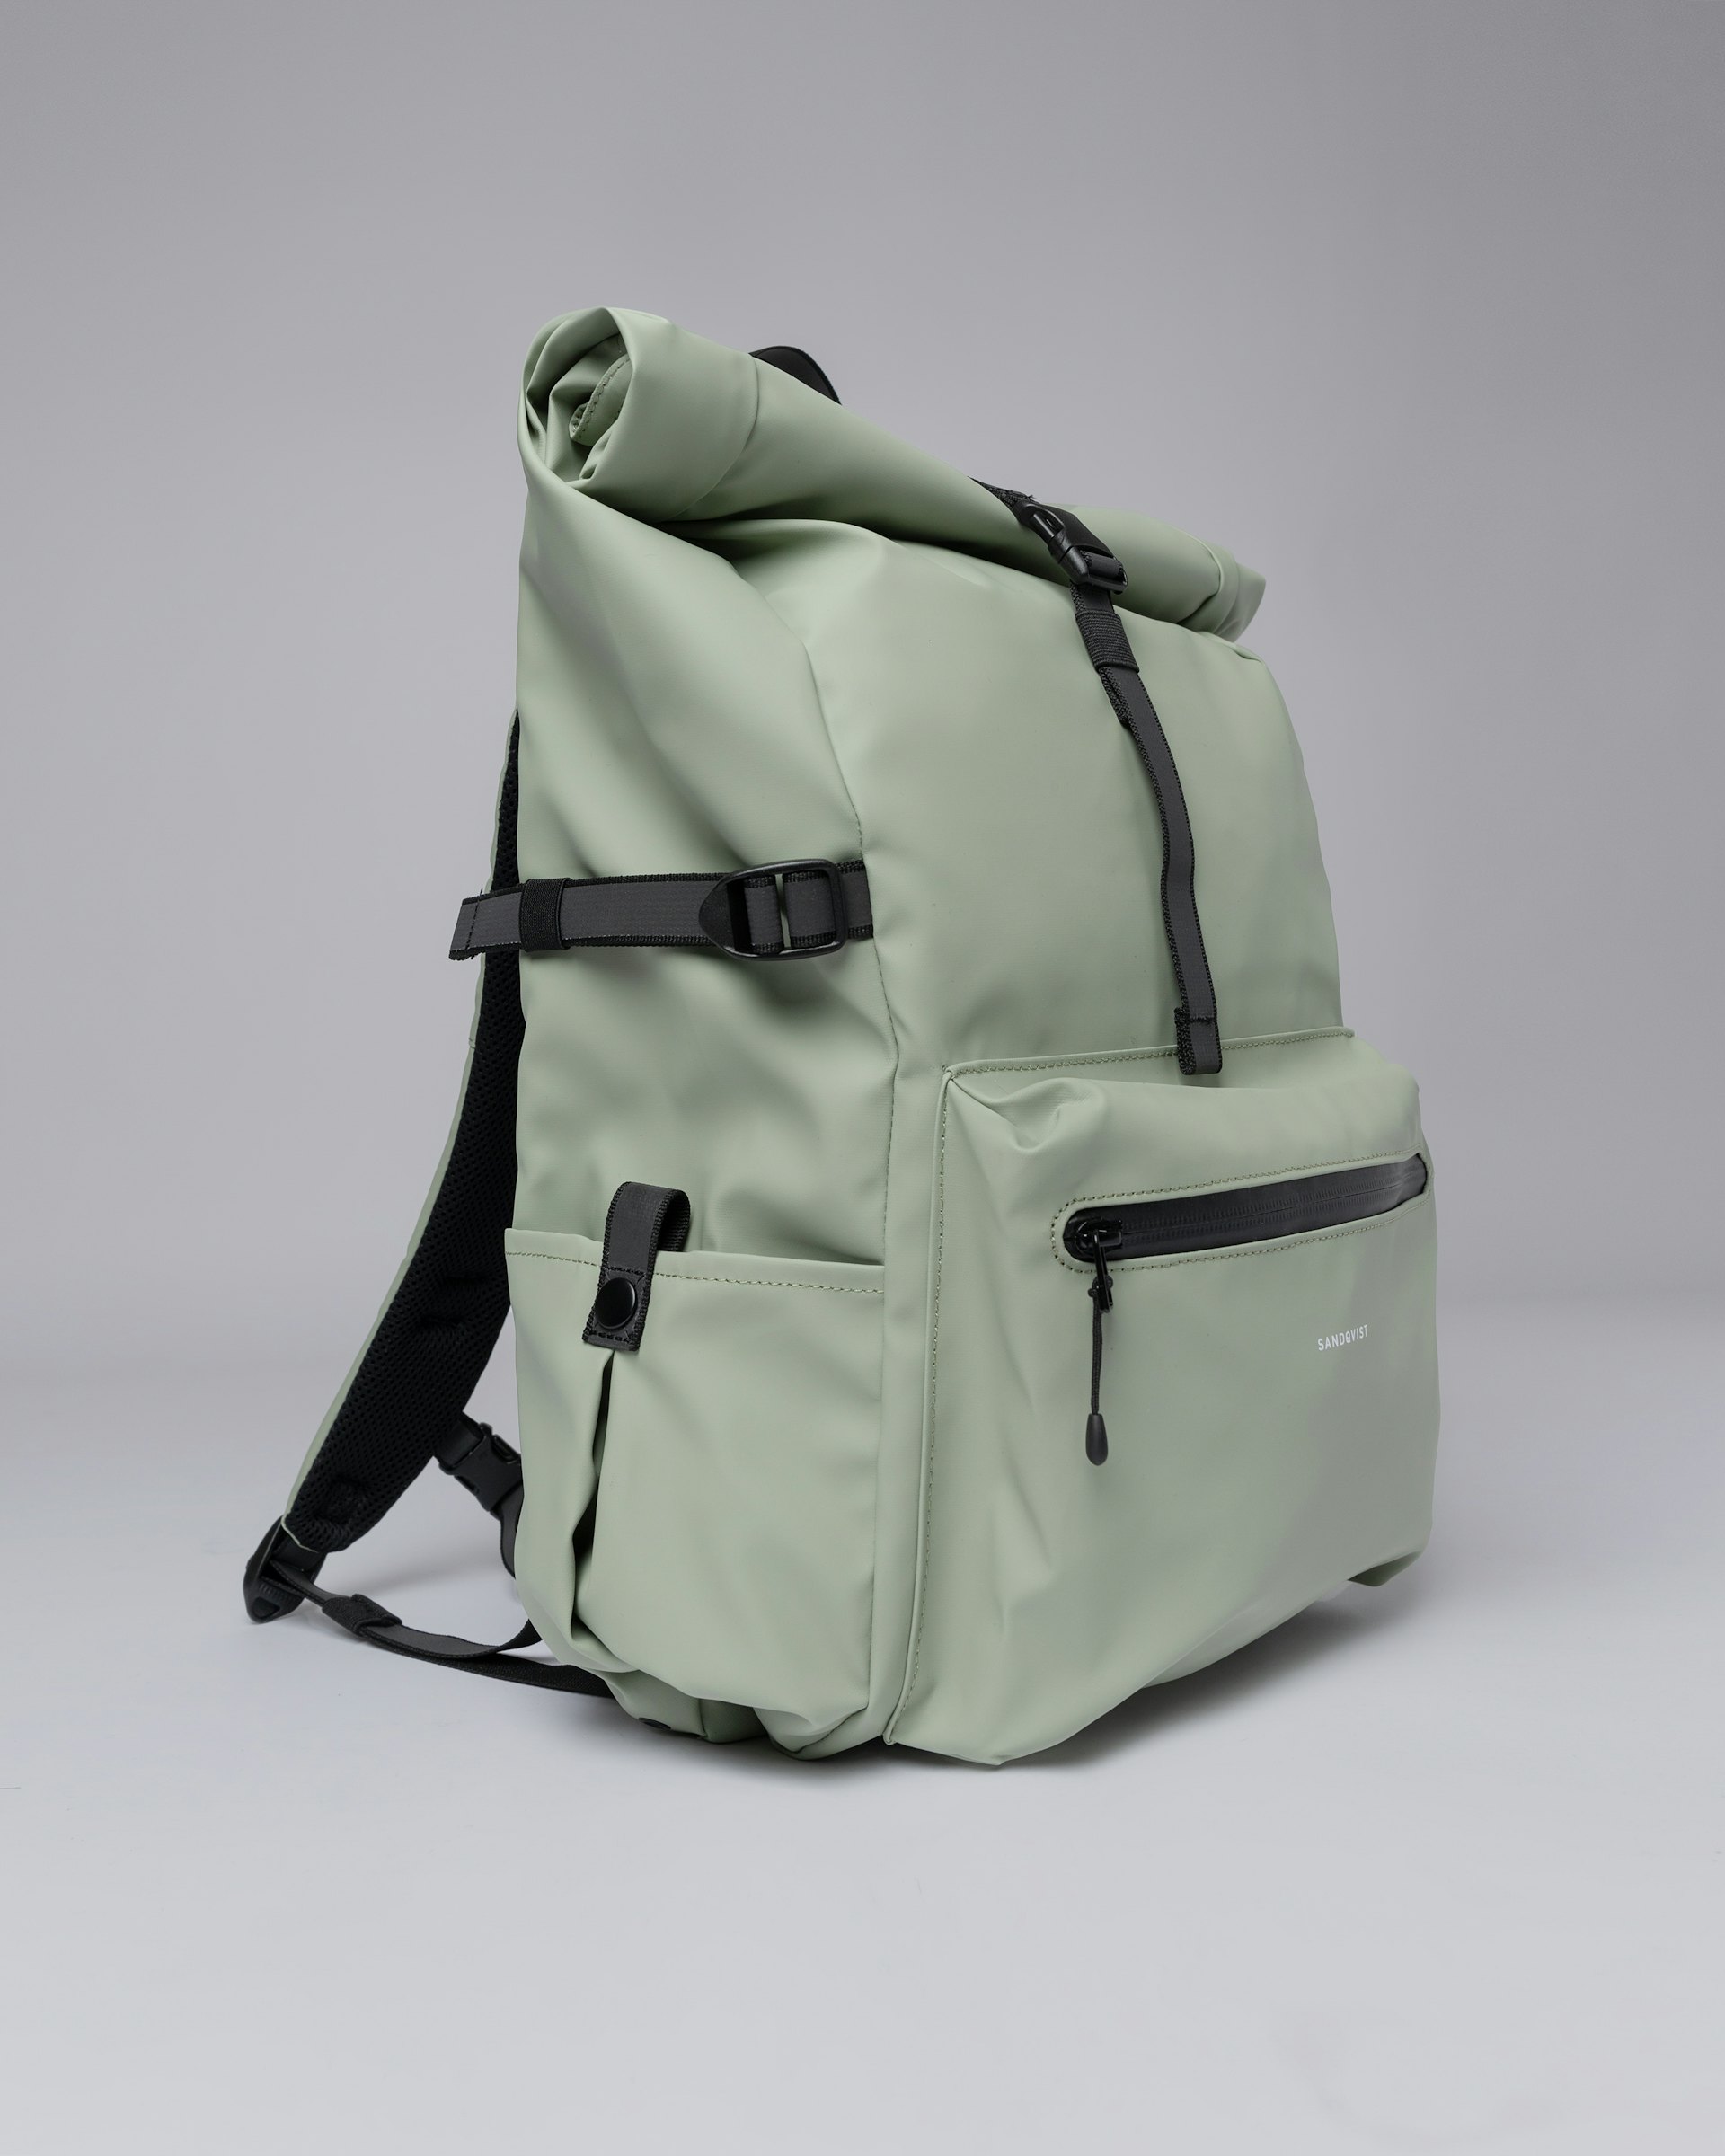 Ruben 2.0 belongs to the category Backpacks and is in color dew green (4 of 5)